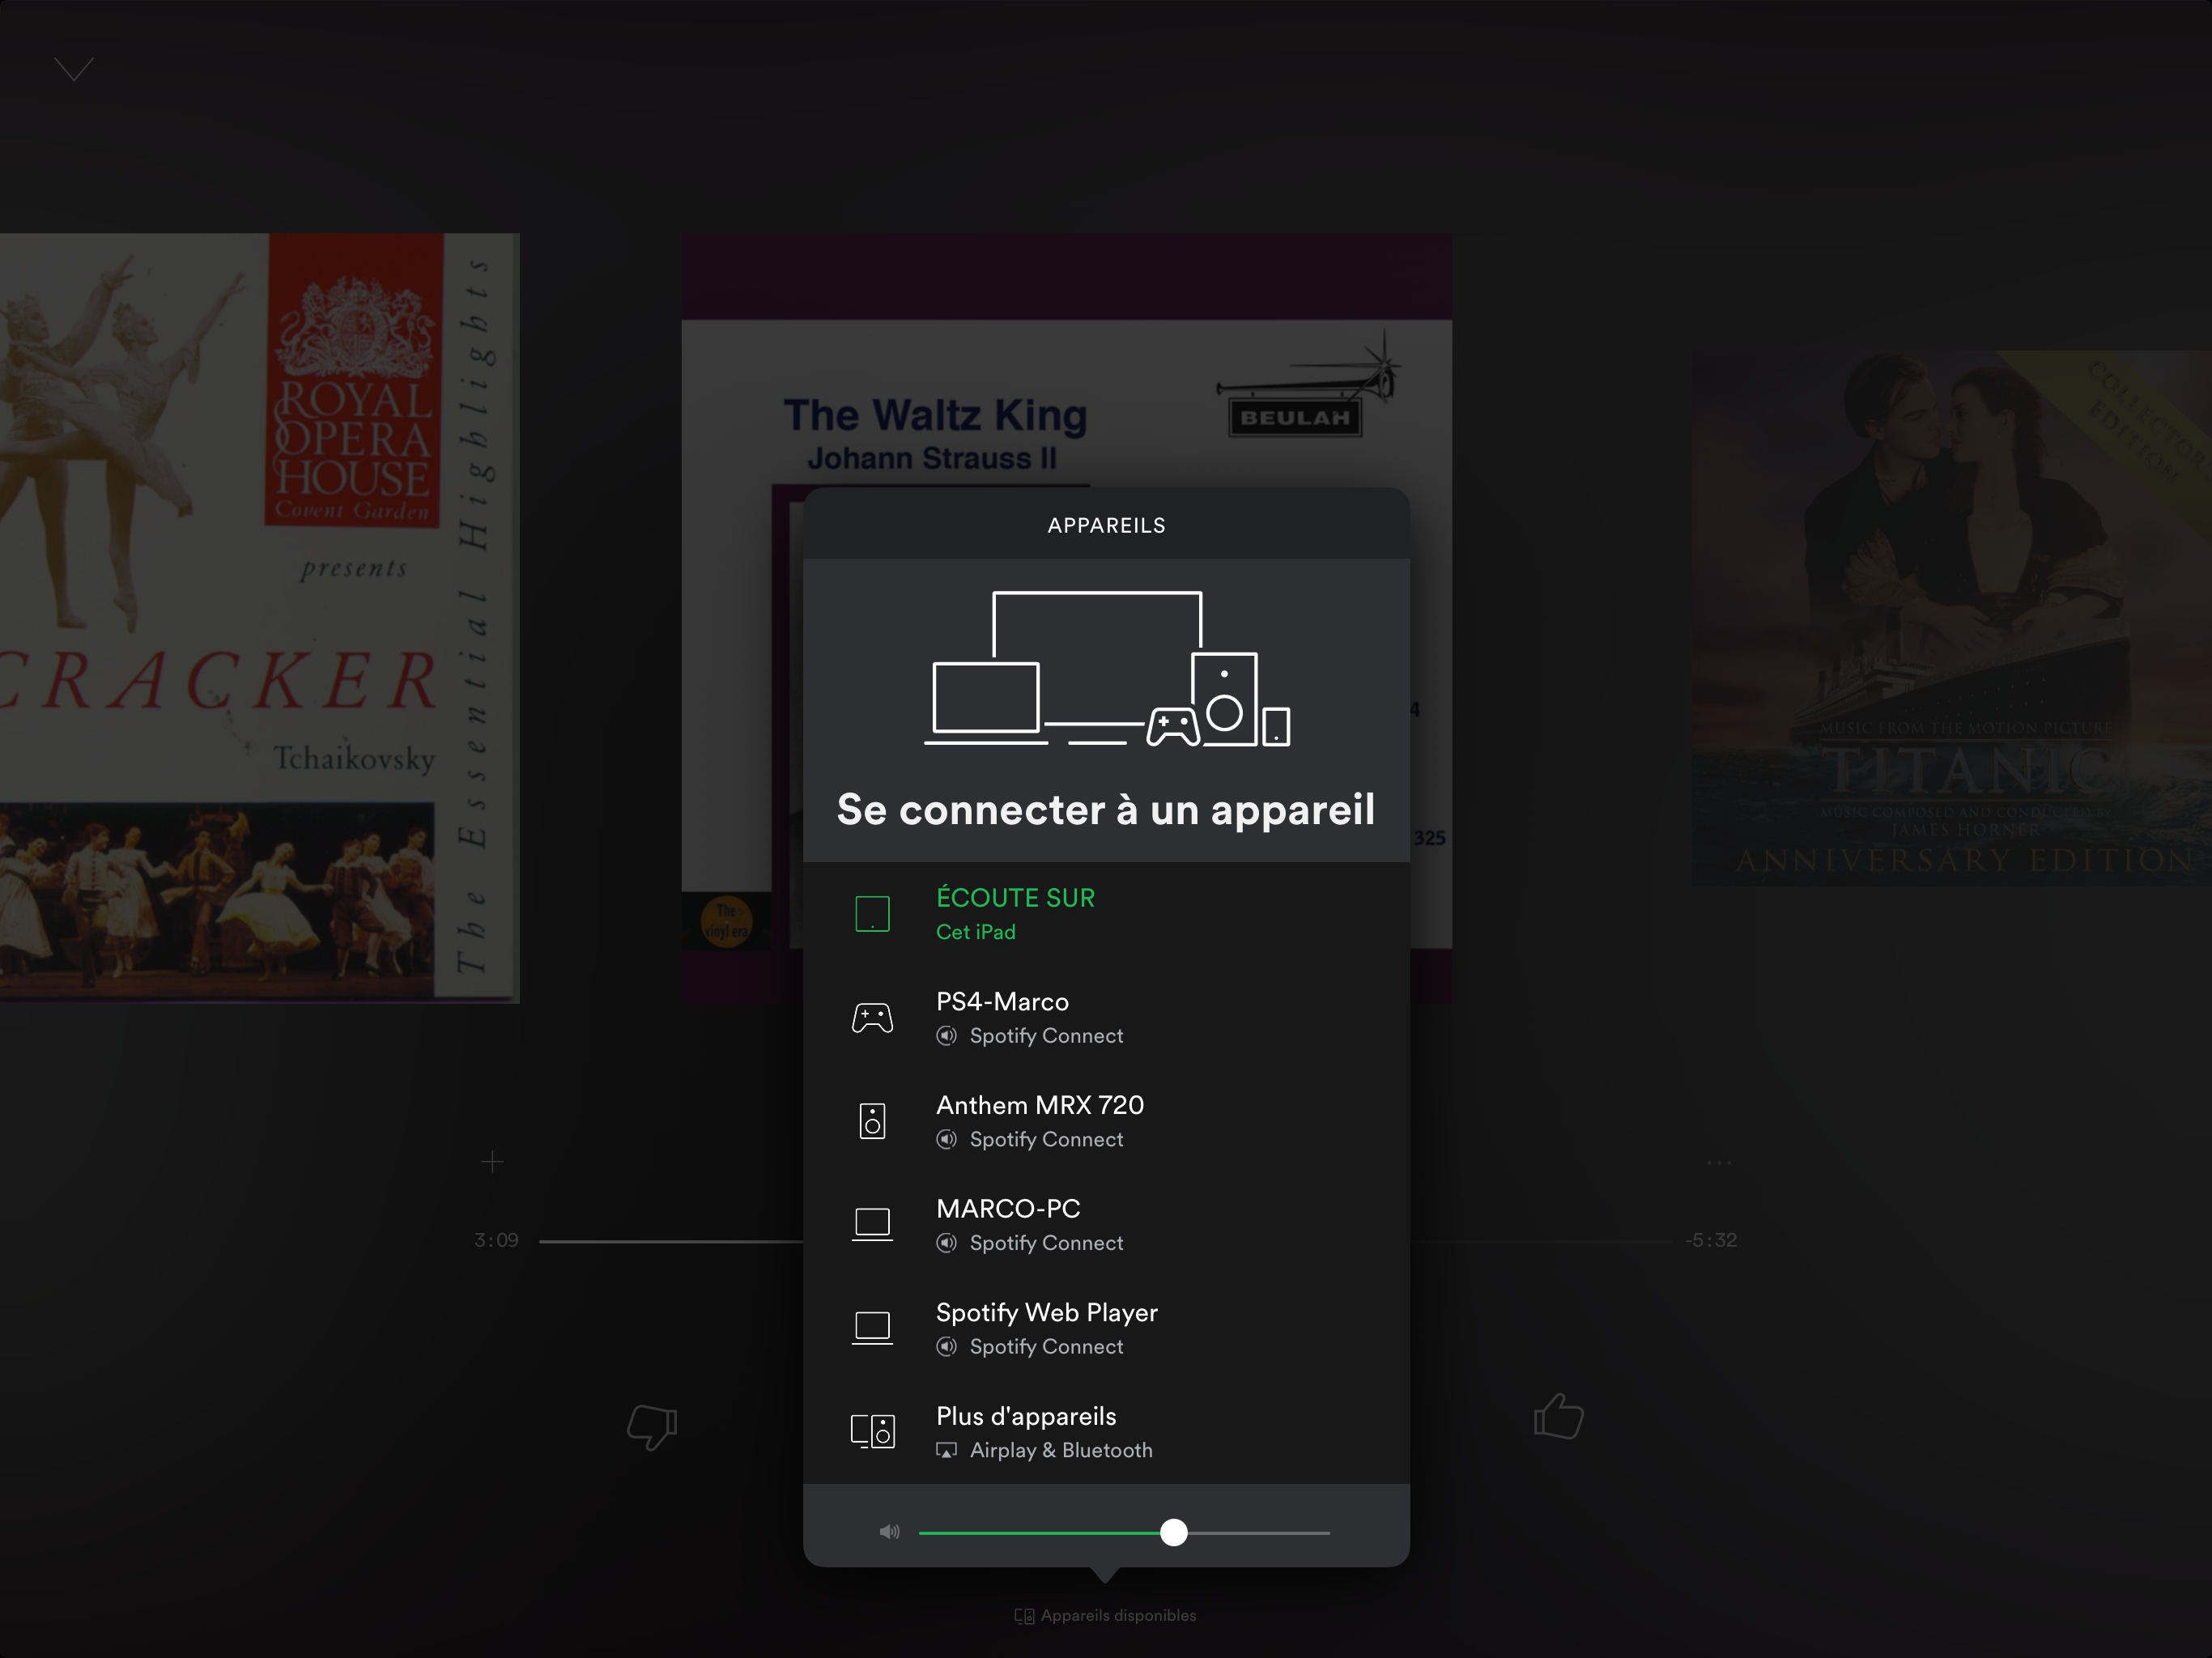 Local files won't play on PS4 or amplifier. - The Spotify Community